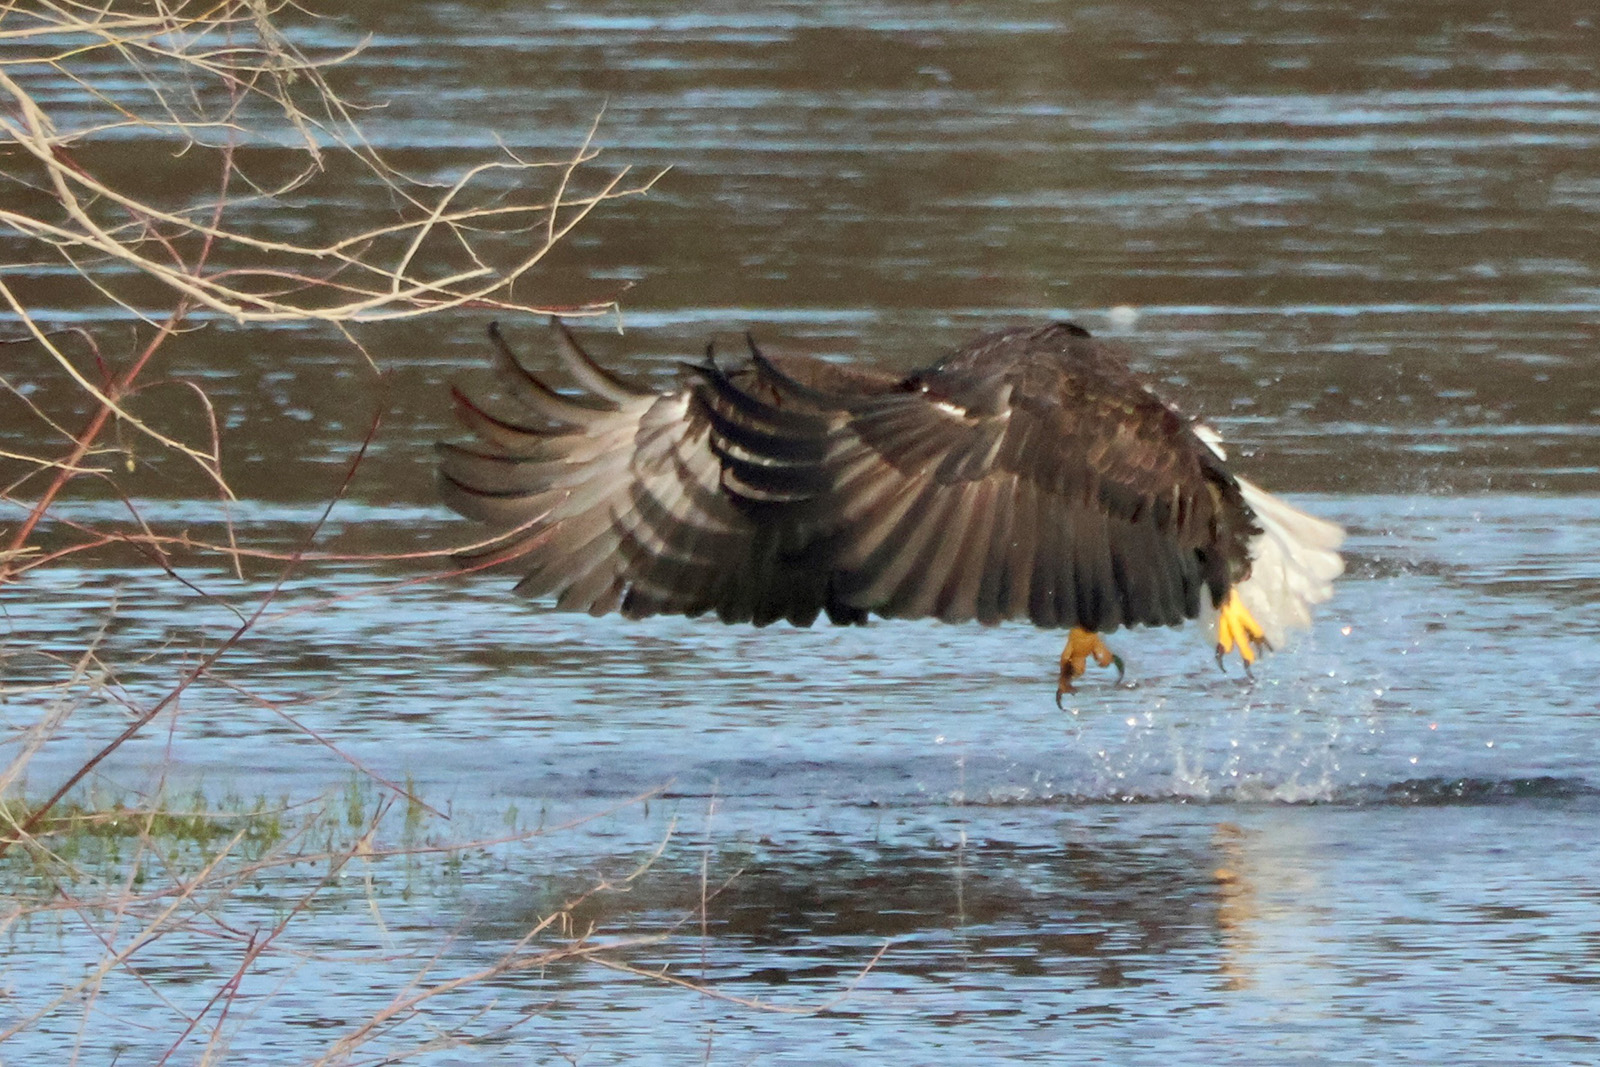 Eagle first flap leaving water